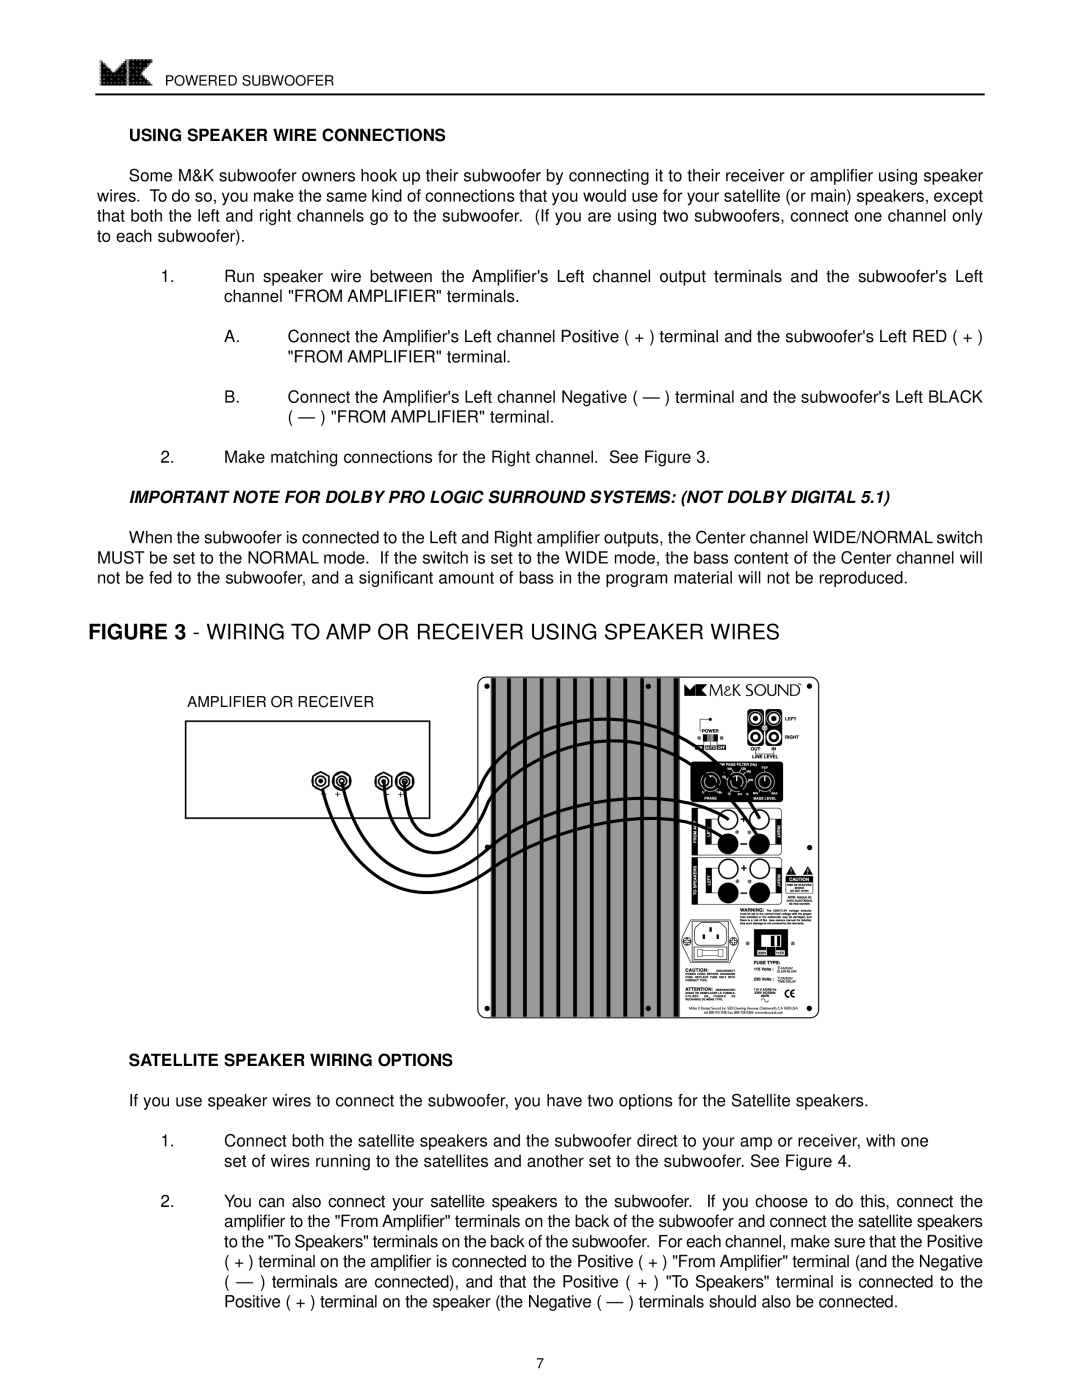 MK Sound VX-1250 operation manual Using Speaker Wire Connections, Satellite Speaker Wiring Options, Powered Subwoofer 